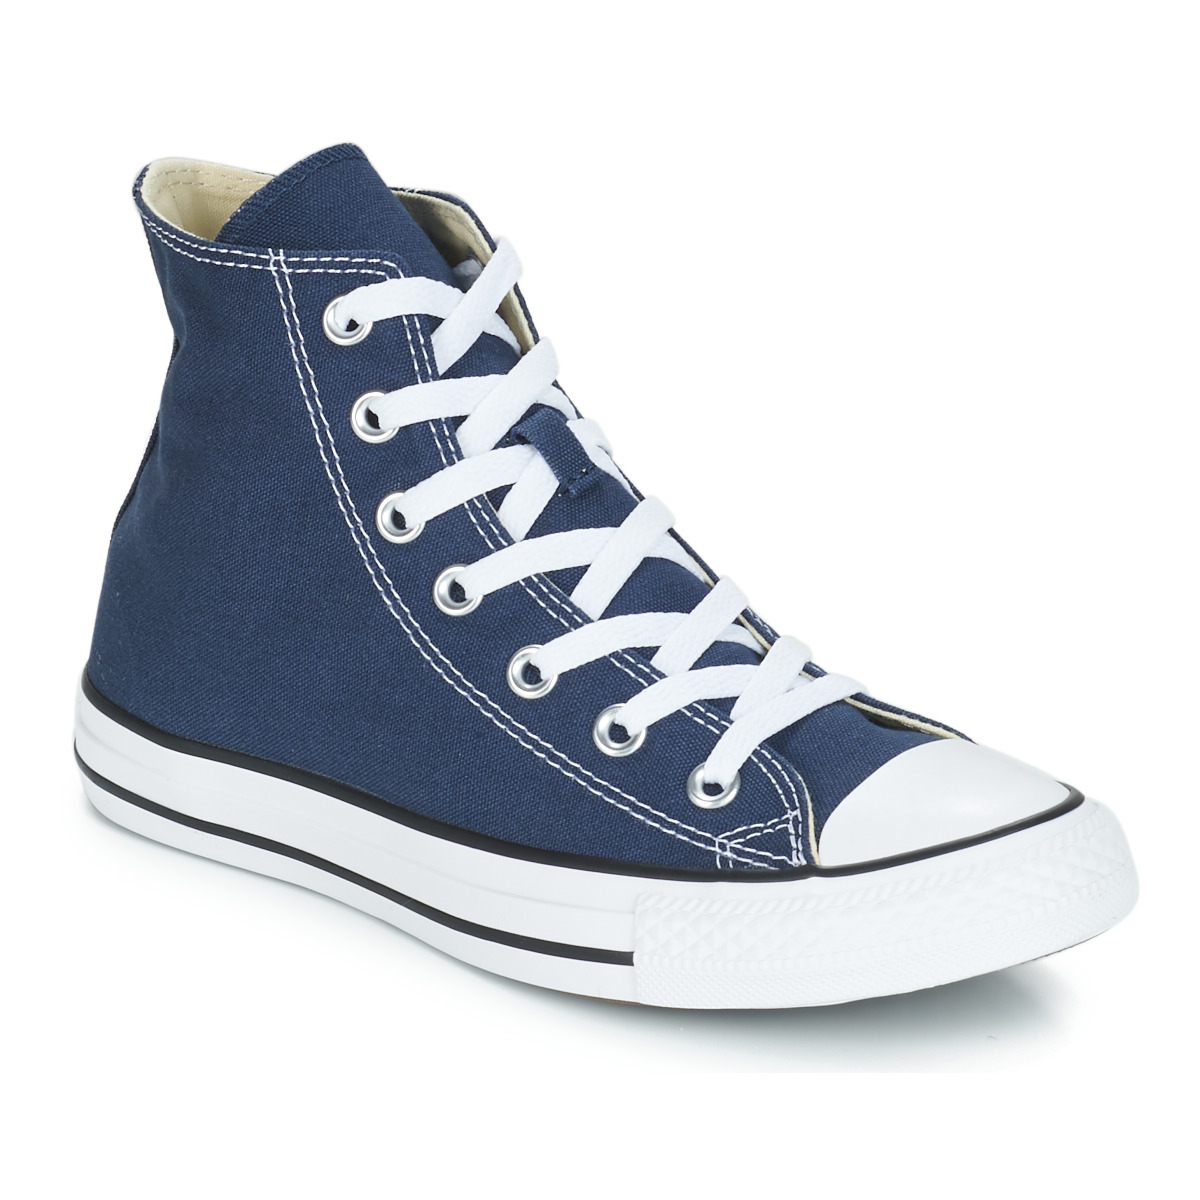 Converse CHUCK TAYLOR ALL STAR CORE HI Marine - levering | ! - Hoge sneakers € 63,70